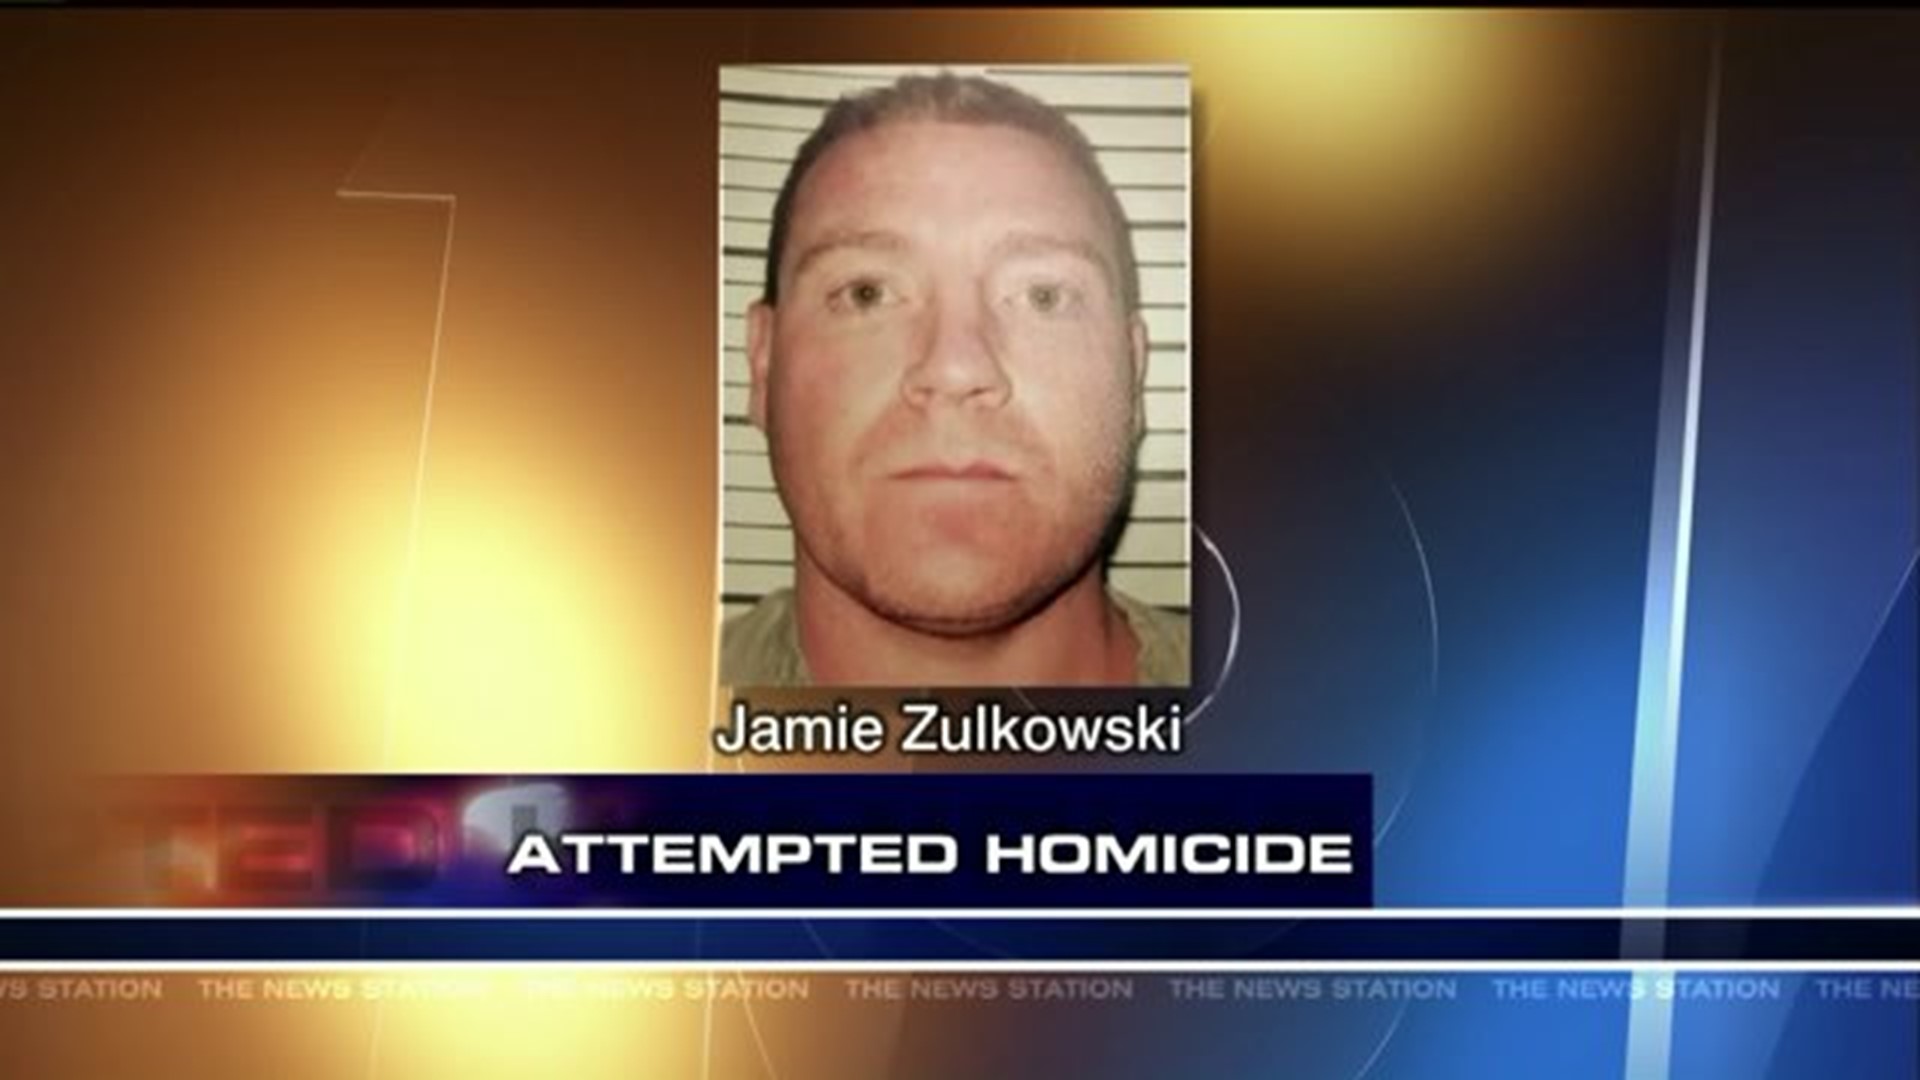 Man Facing Attempted Homicide After Attack in Schuylkill County